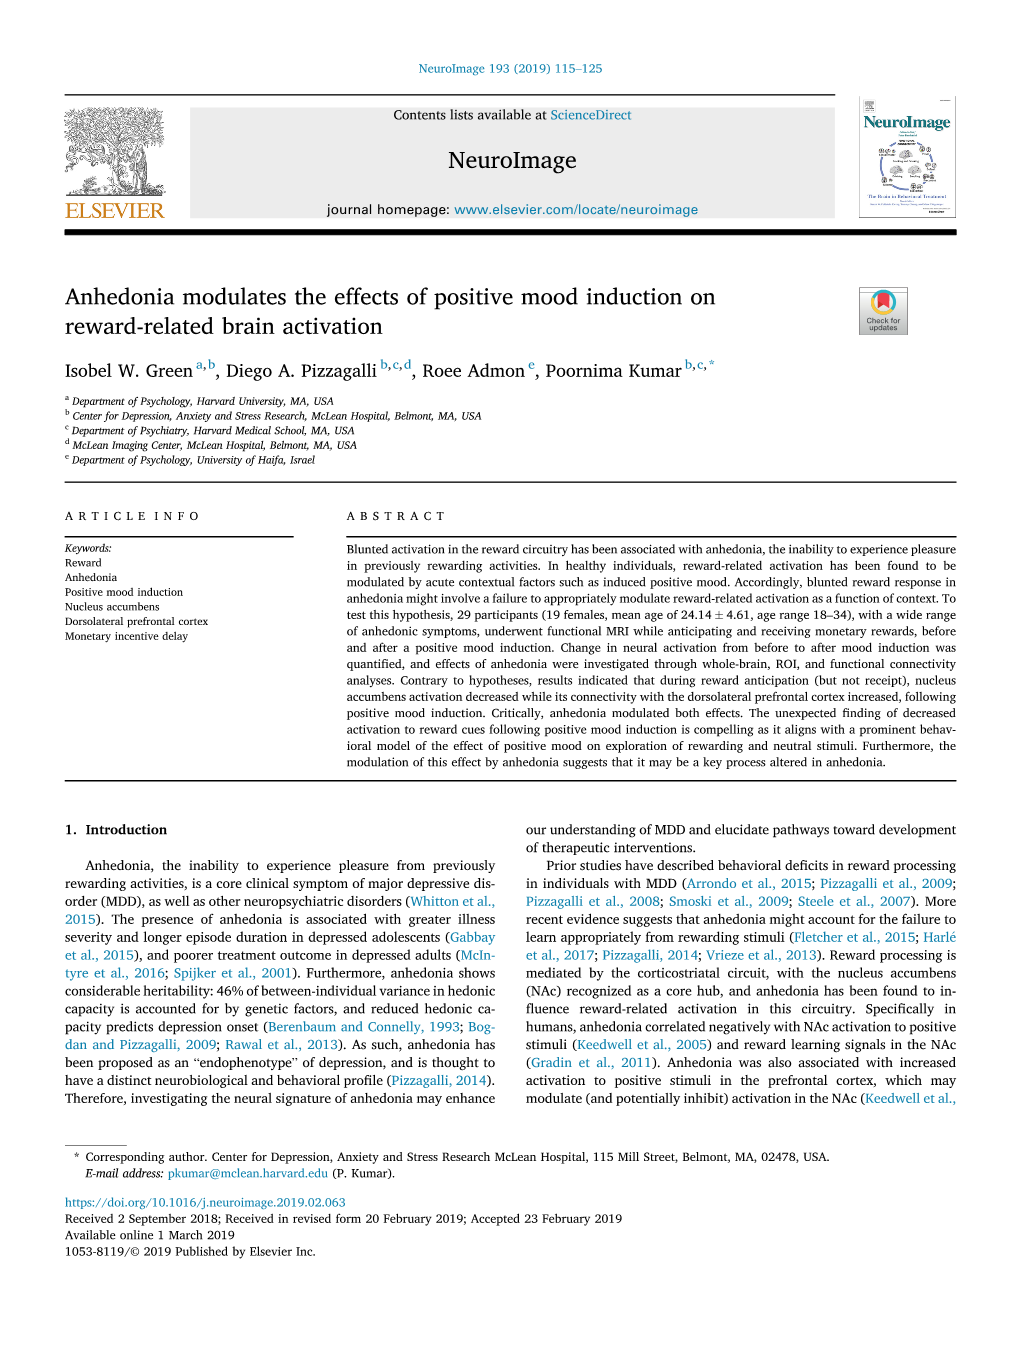 Anhedonia Modulates the Effects of Positive Mood Induction on Reward-Related Brain Activation